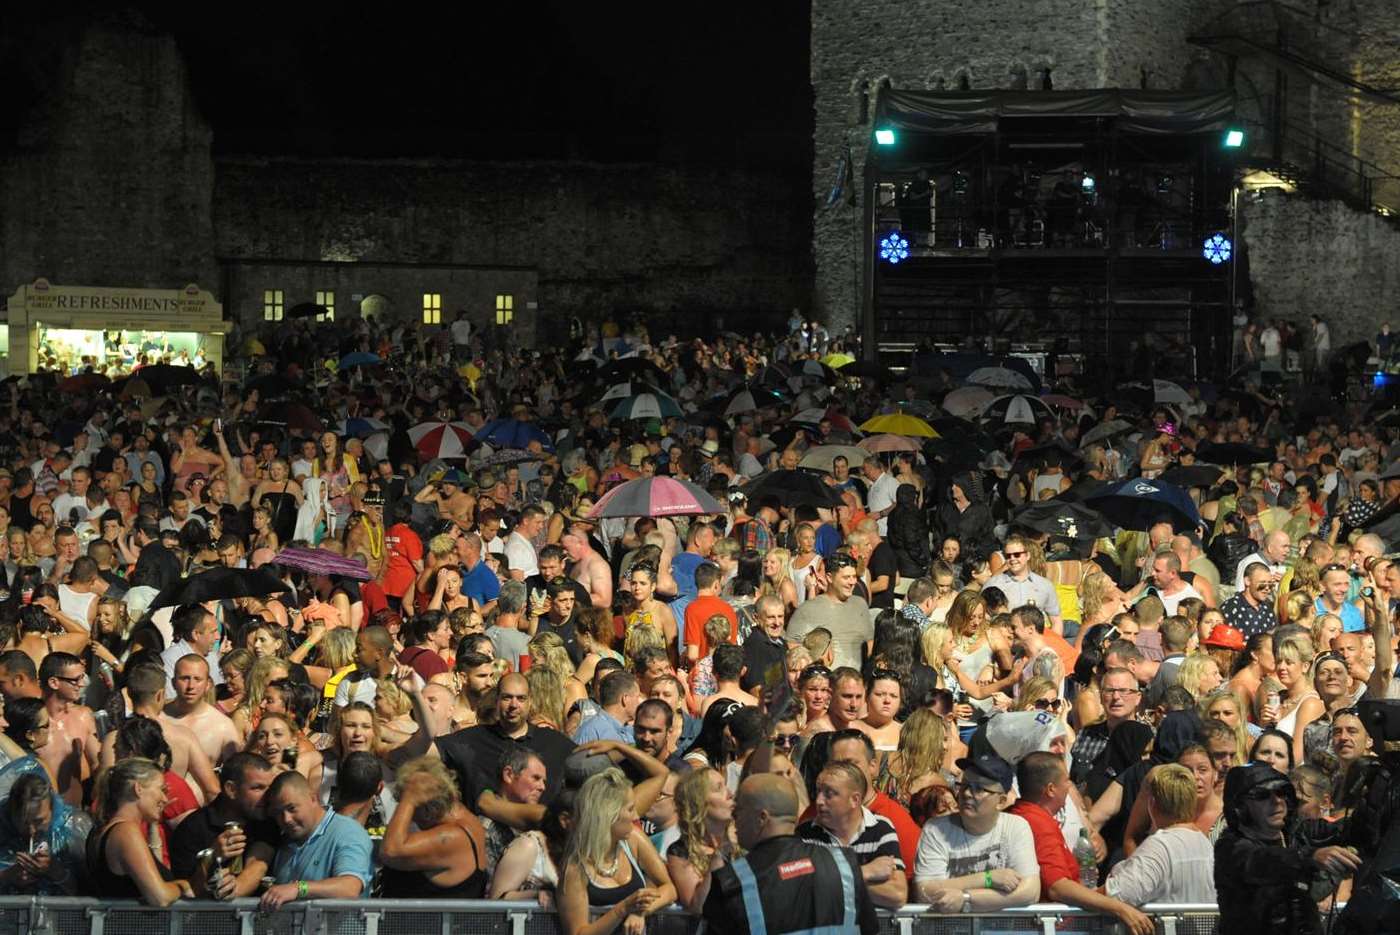 Crowds try to shelter from the rain during UB40's performance